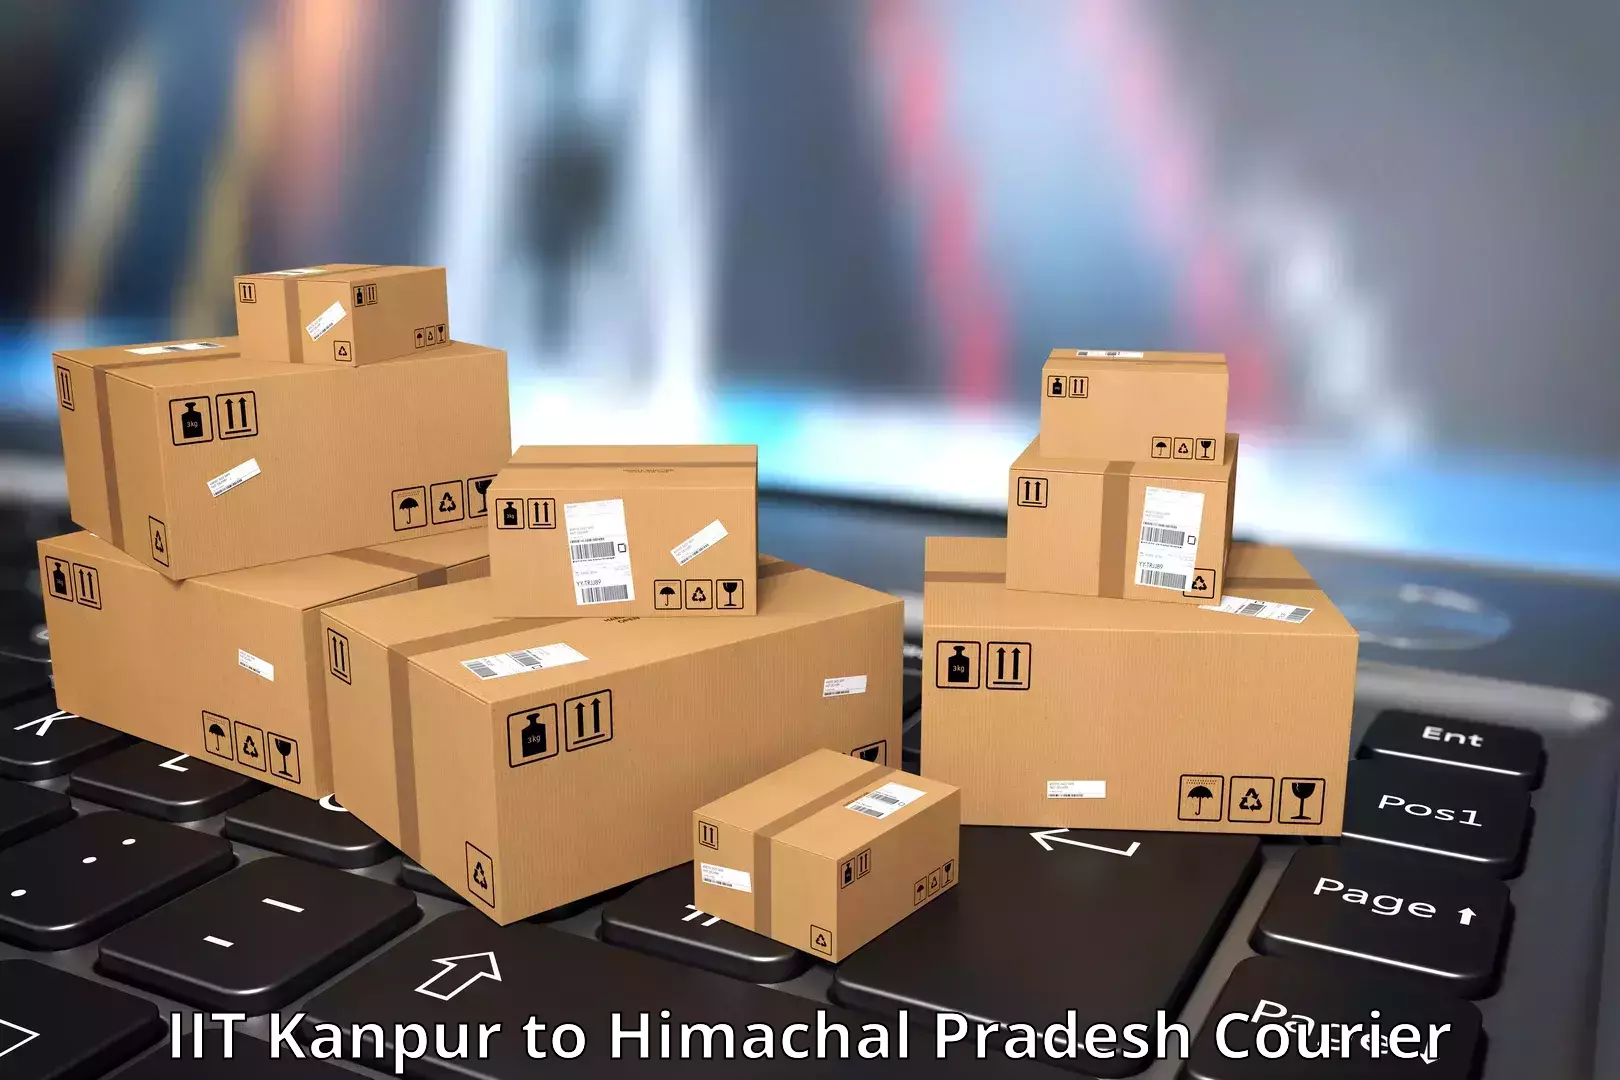 24-hour delivery options IIT Kanpur to Himachal Pradesh